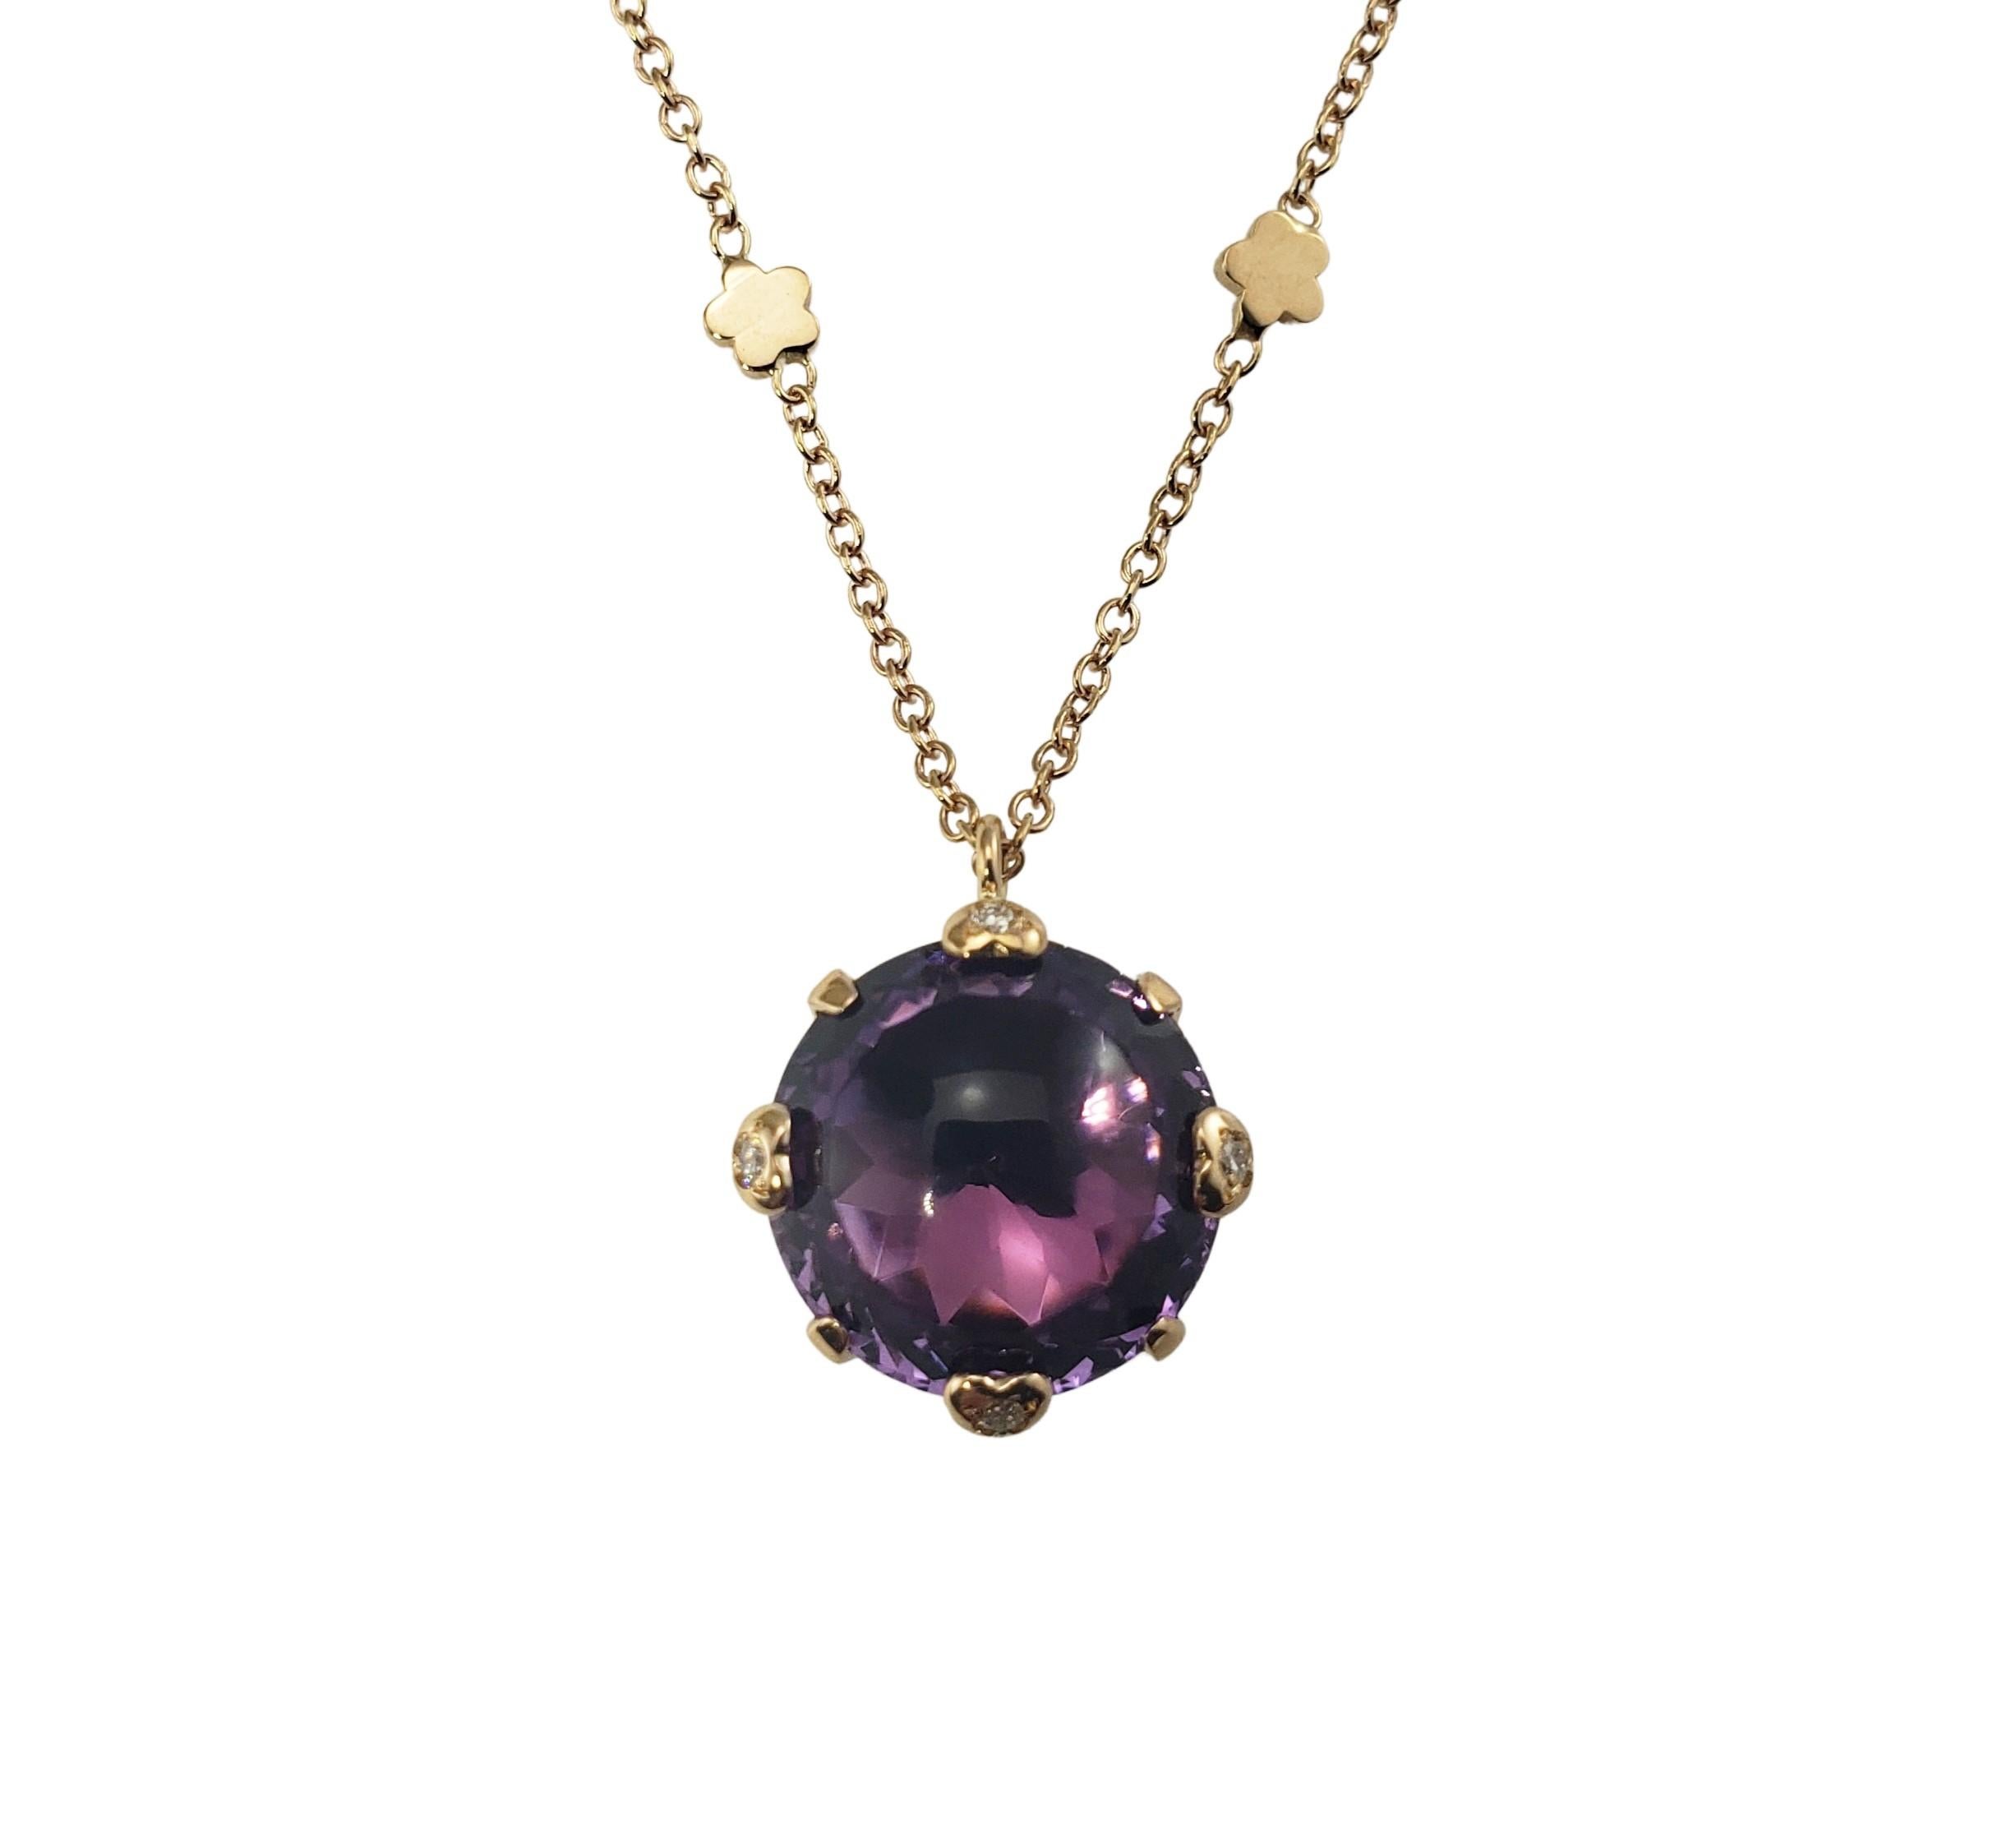 Pasquale Bruni 18 Karat Yellow Gold and Amethyst Pendant Necklace-

This lovely pendant features one cabochon amethyst (11 mm) set in beautifully detailed 18K yellow gold.  Suspends from a classic cable necklace accented with tiny stars. 

Size: